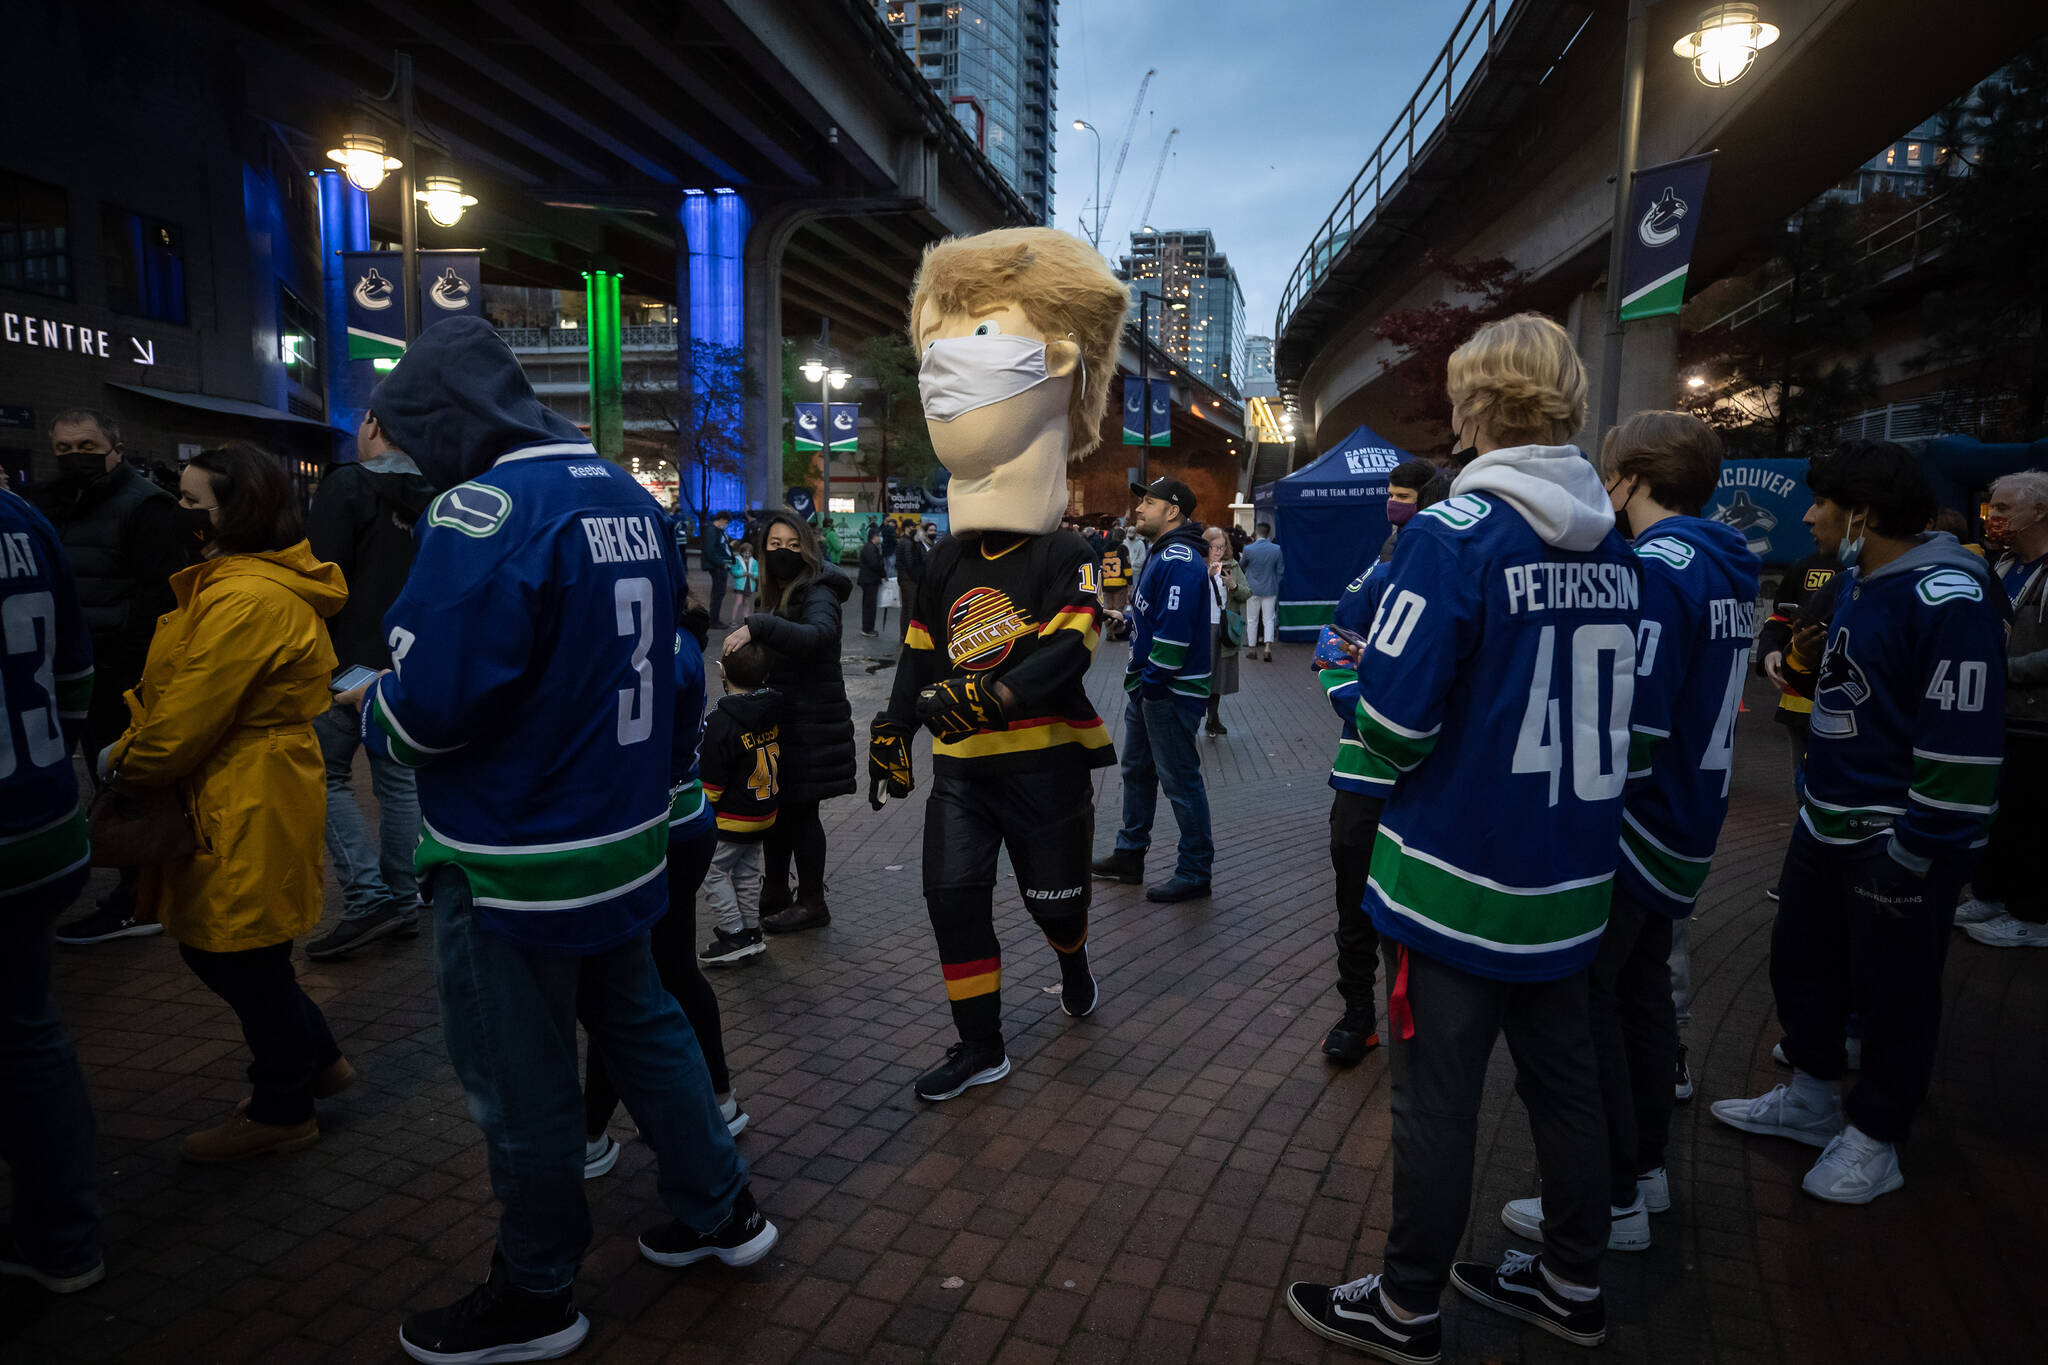 A Pavel Bure mascot wearing a face mask walks through the crowd as fans wait to enter Rogers Arena for the Vancouver Canucks NHL hockey game against the Minnesota Wild in Vancouver, on Tuesday, October 26, 2021. THE CANADIAN PRESS/Darryl Dyck